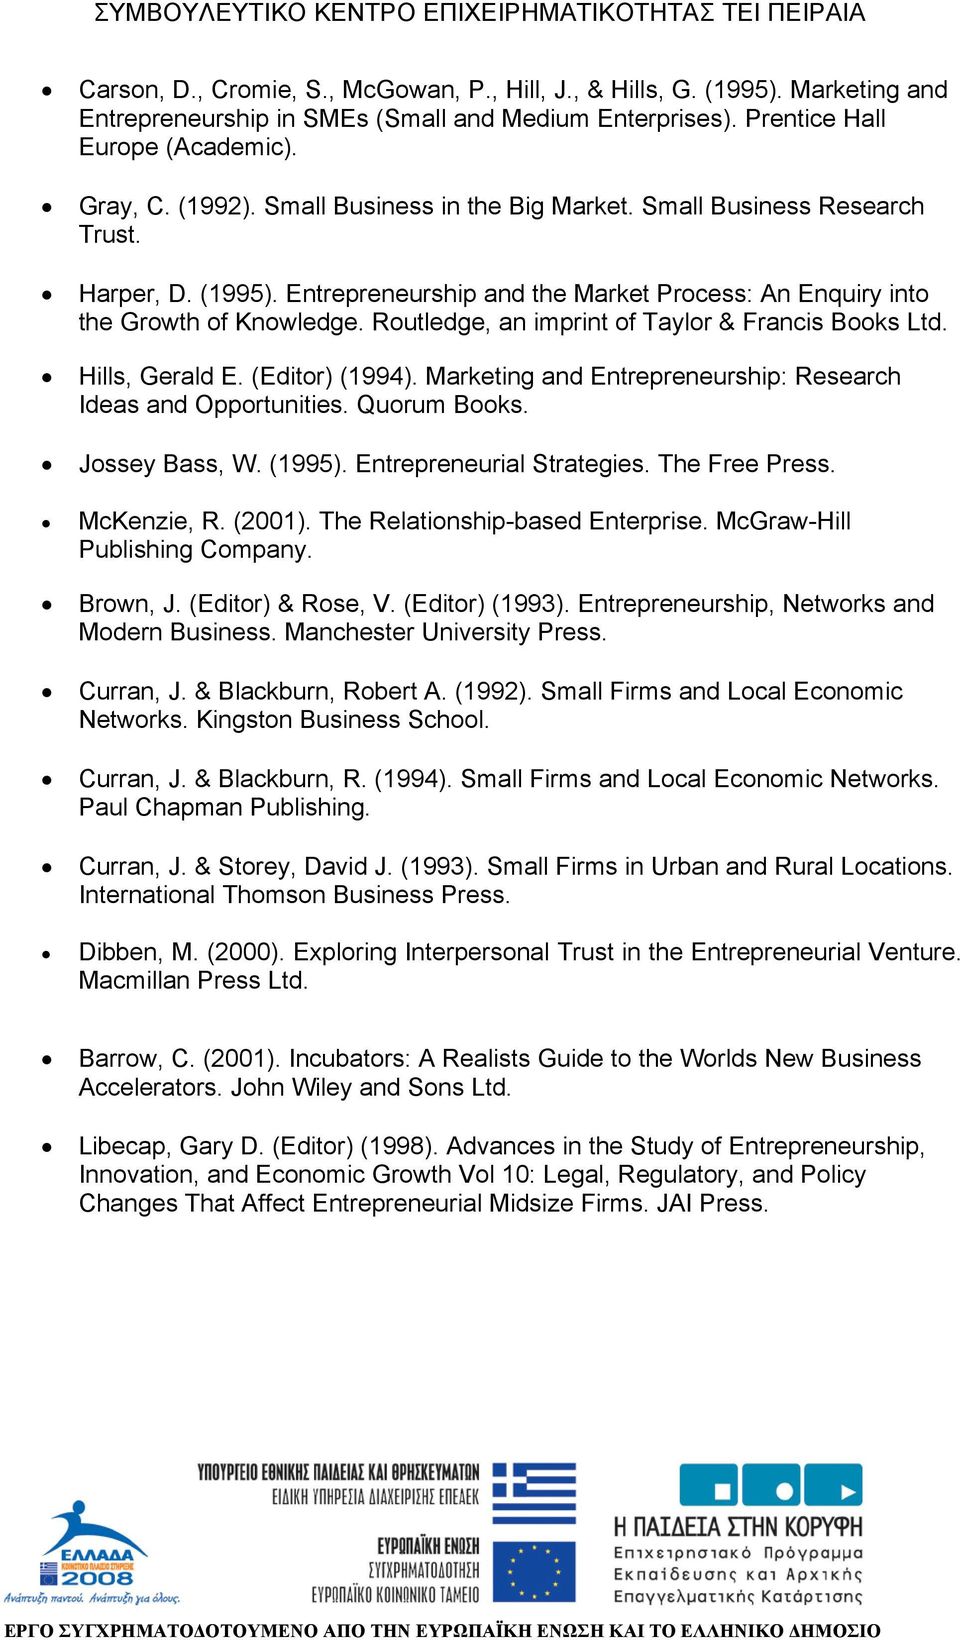 Routledge, an imprint of Taylor & Francis Books Ltd. Hills, Gerald E. (Editor) (1994). Marketing and Entrepreneurship: Research Ideas and Opportunities. Quorum Books. Jossey Bass, W. (1995).